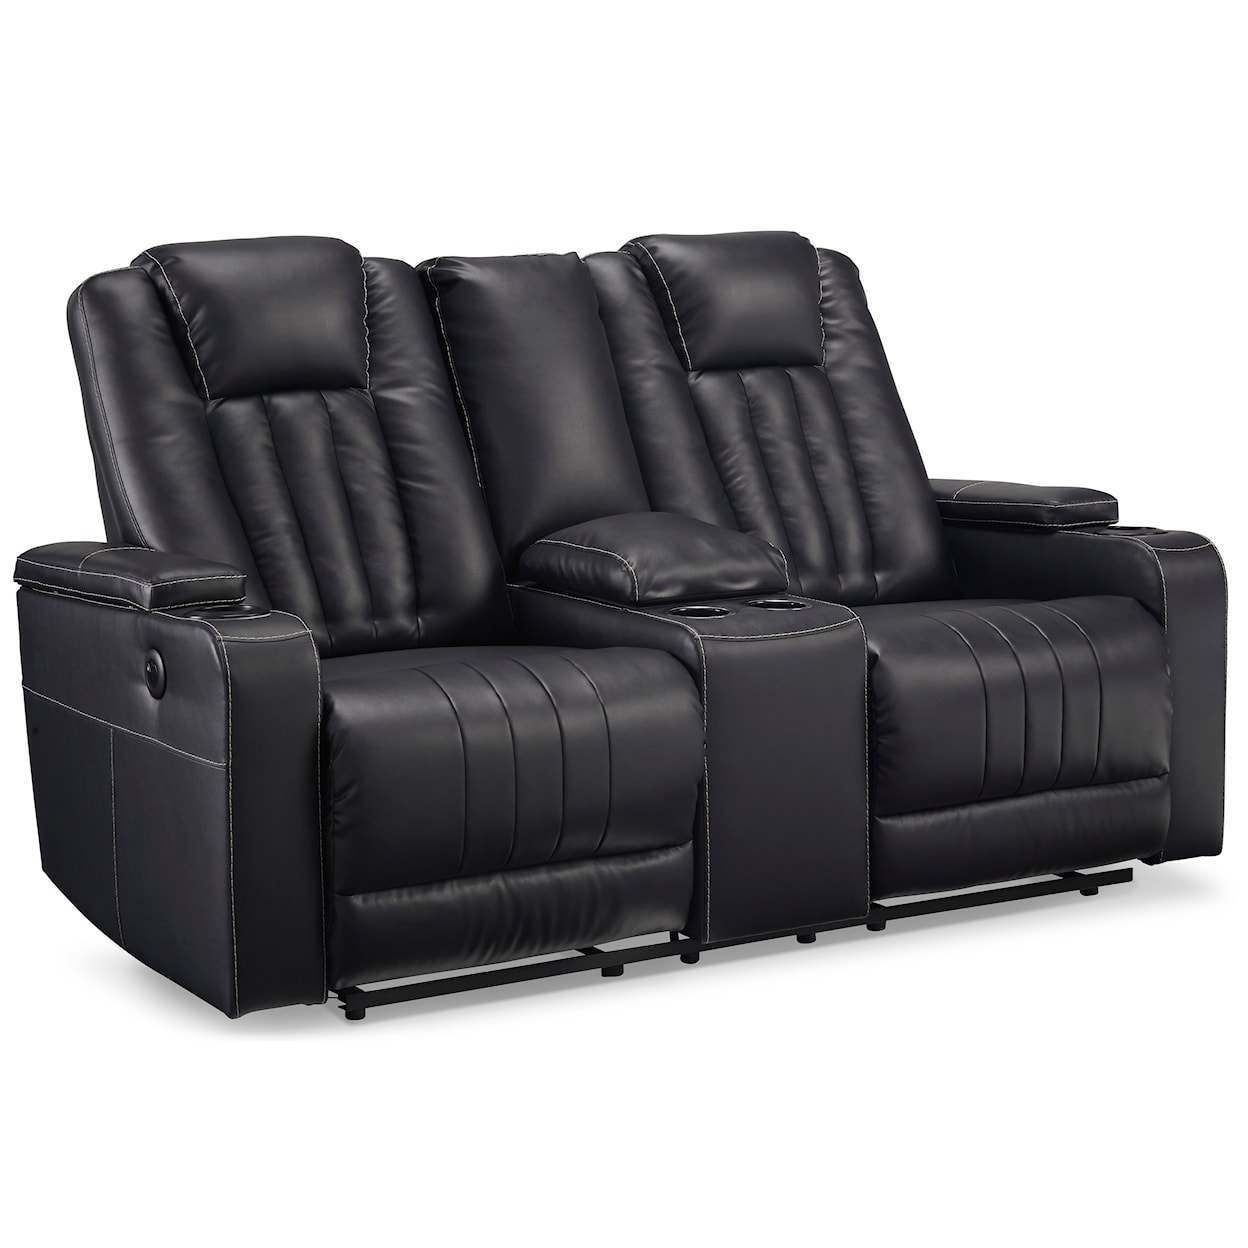 Signature Design by Ashley Center Point Reclining Loveseat